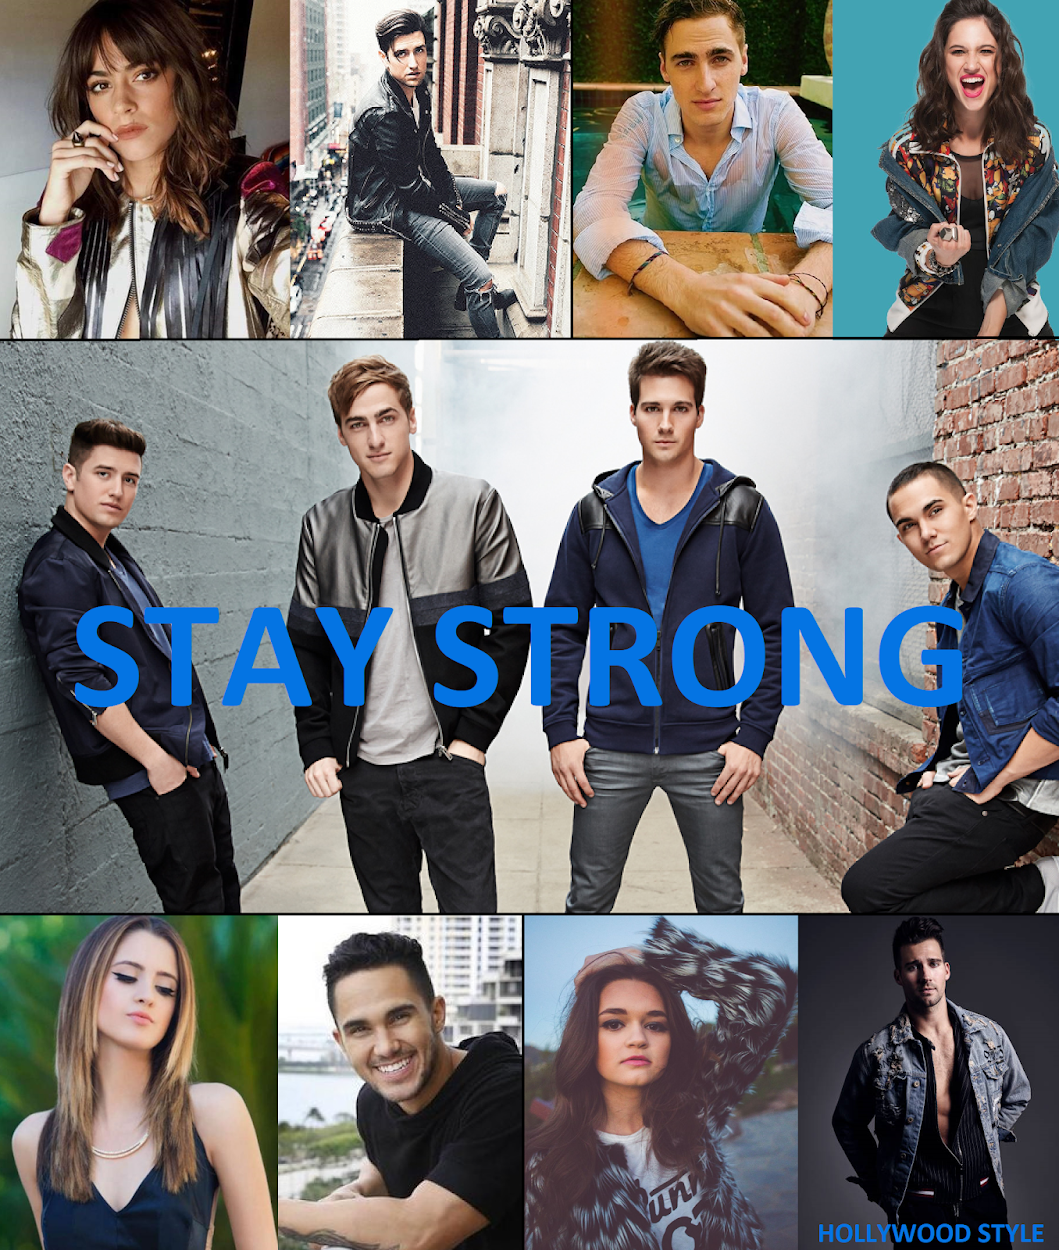 "Stay Strong"